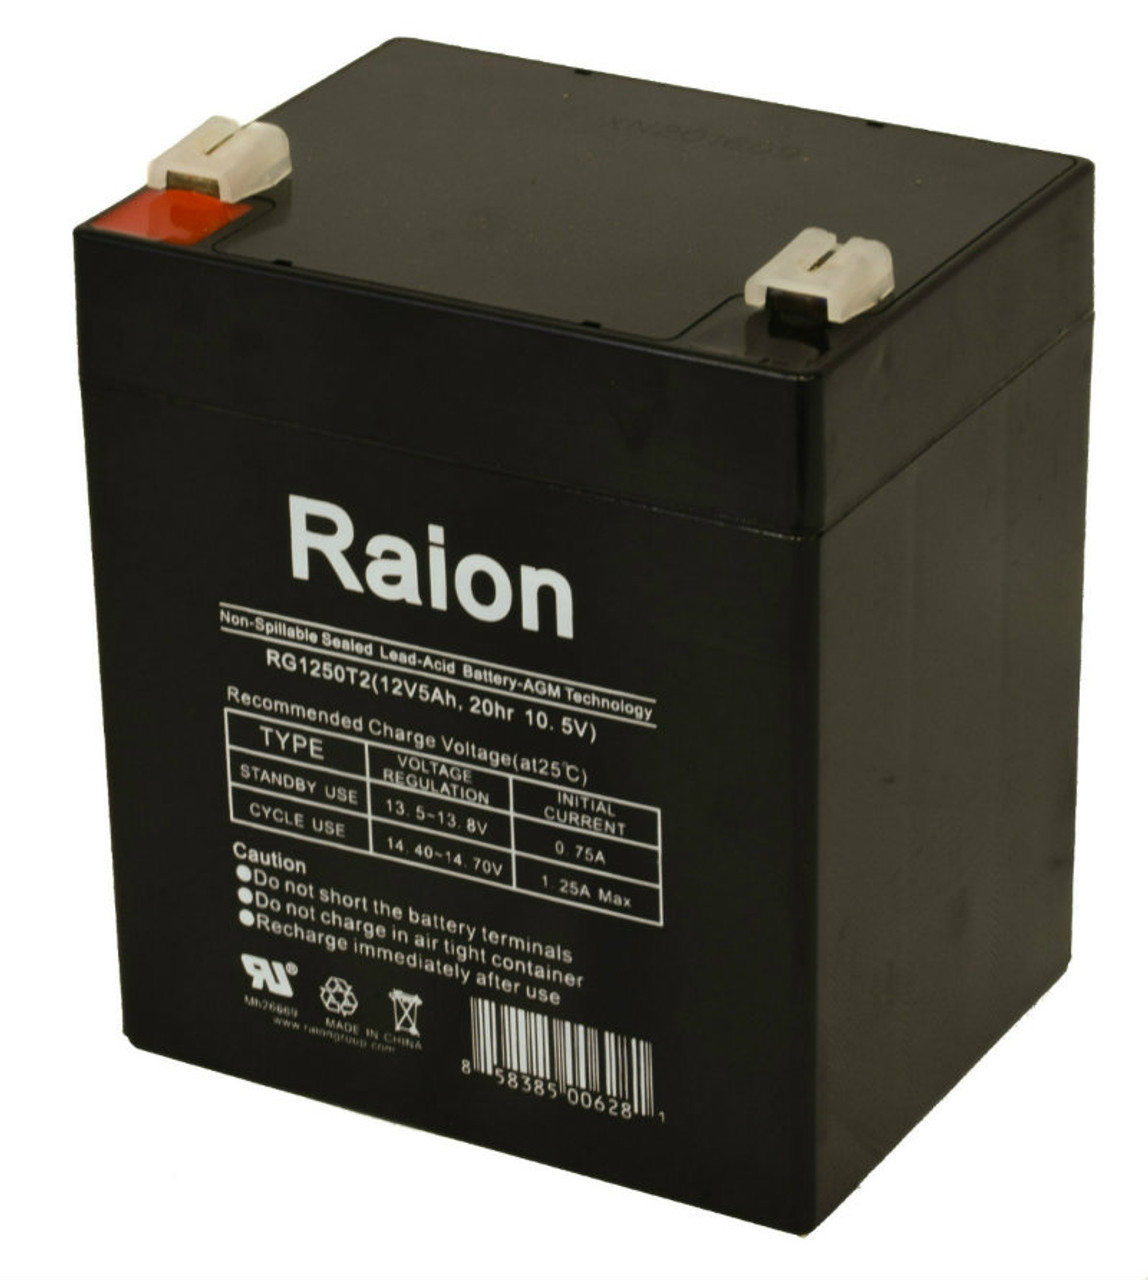 Raion Power RG1250T2 Replacement AGM Battery for Qaba Adjustable Folding Seated E-Scooter AA1-028RD